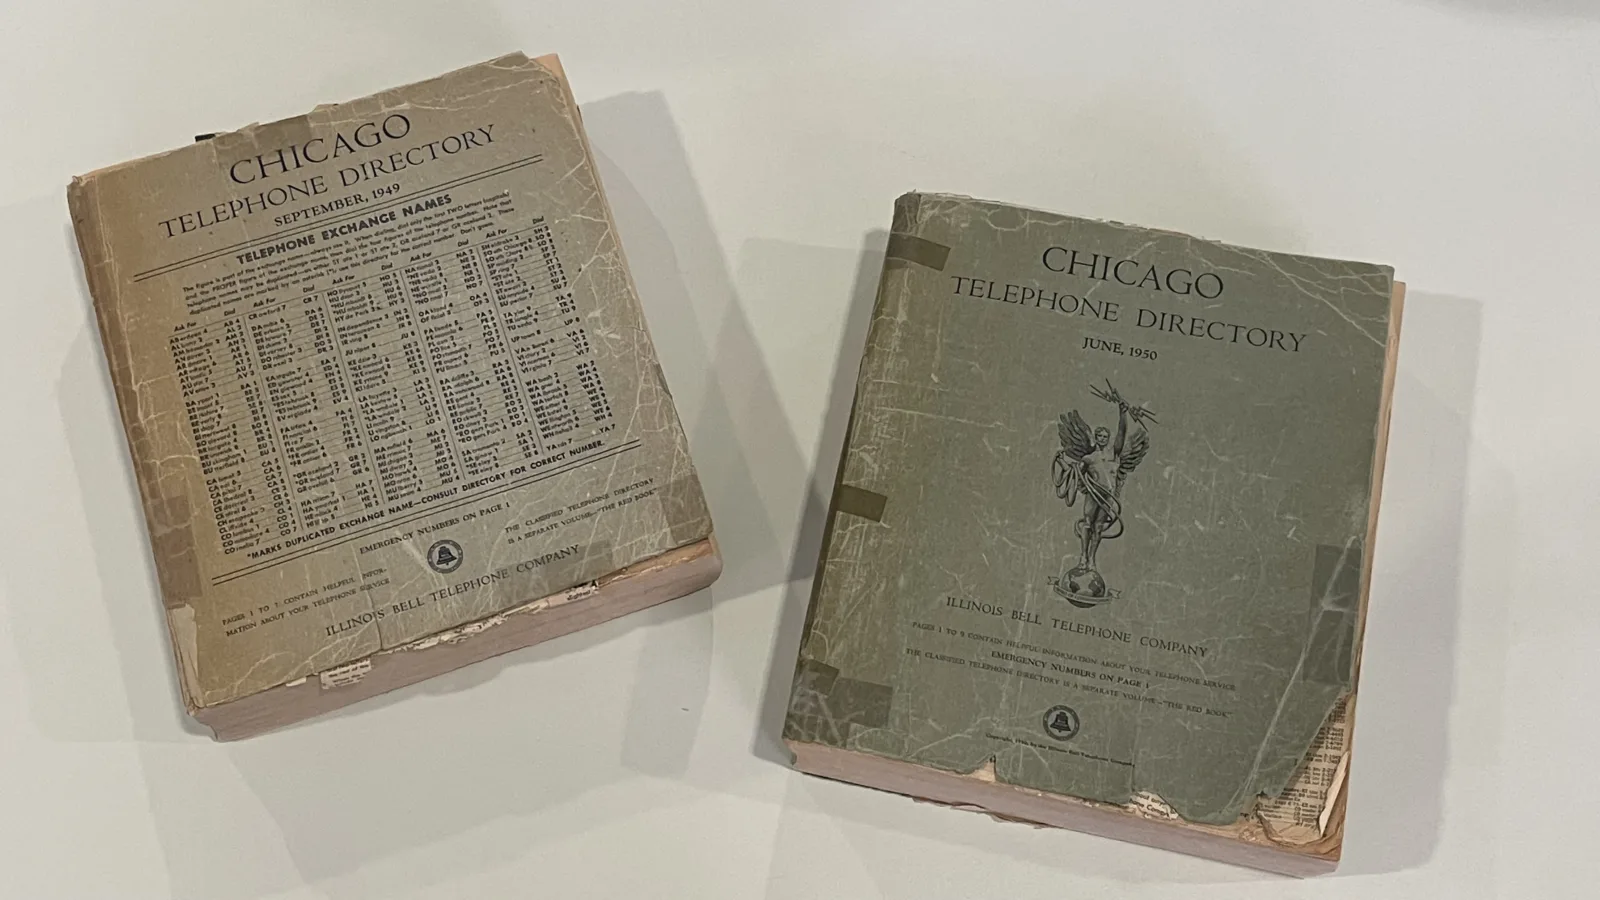 Covers of two Chicago telephone directories at the Newberry. The one on the left is from September 1949, and the one on the right is from June 1950.